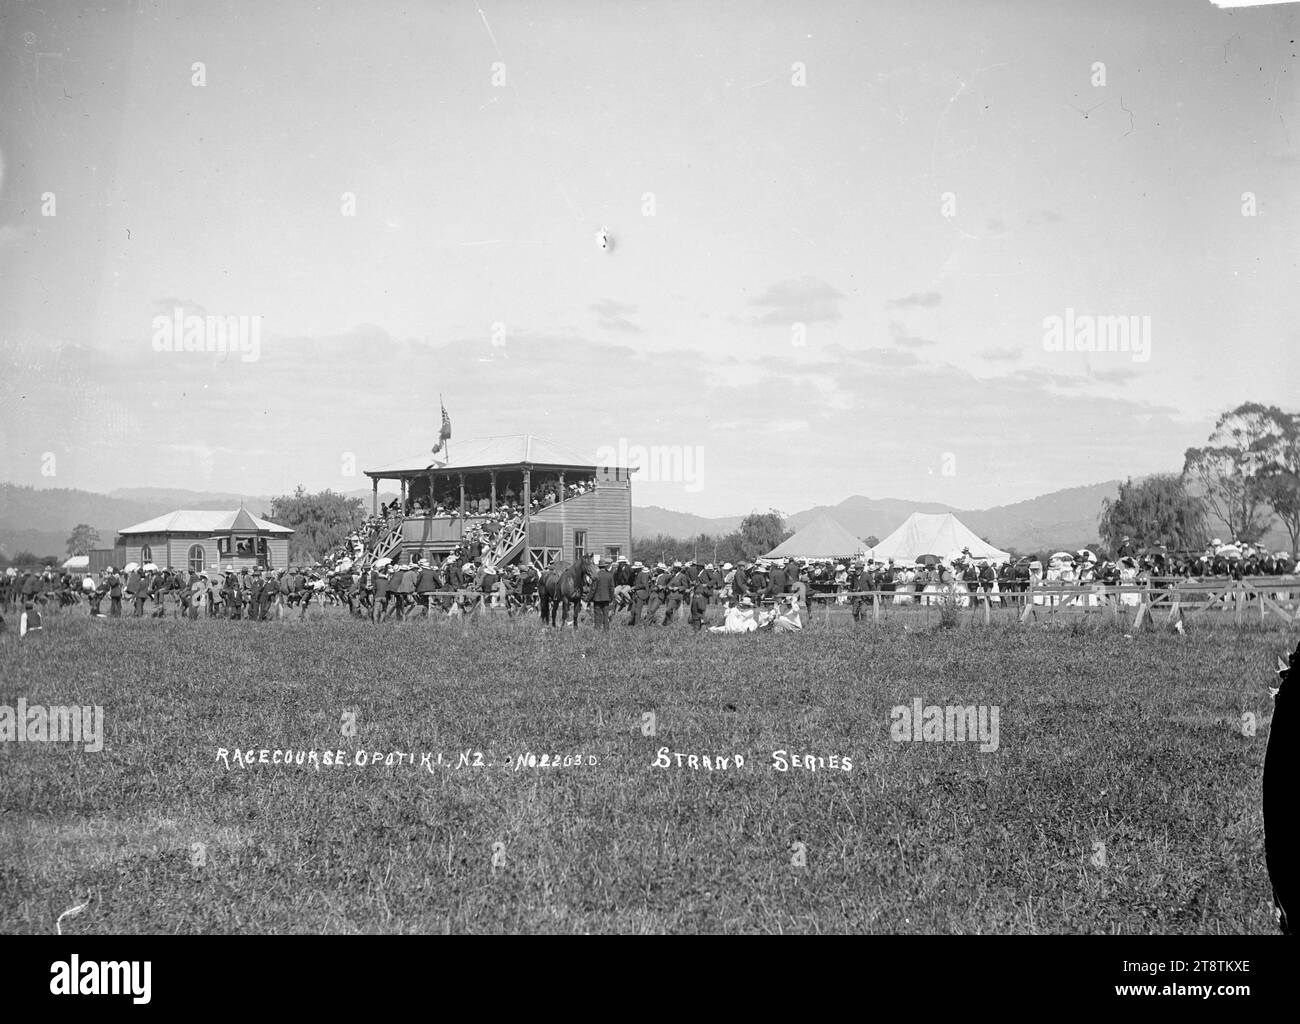 Grandstand and racecourse, Opotiki, View of the grandstand, buildings, tents on race day at the Opotiki race course. Spectators are viewing the racing from the grandstand and lining the fences close to the stand. in early 1900s Stock Photo